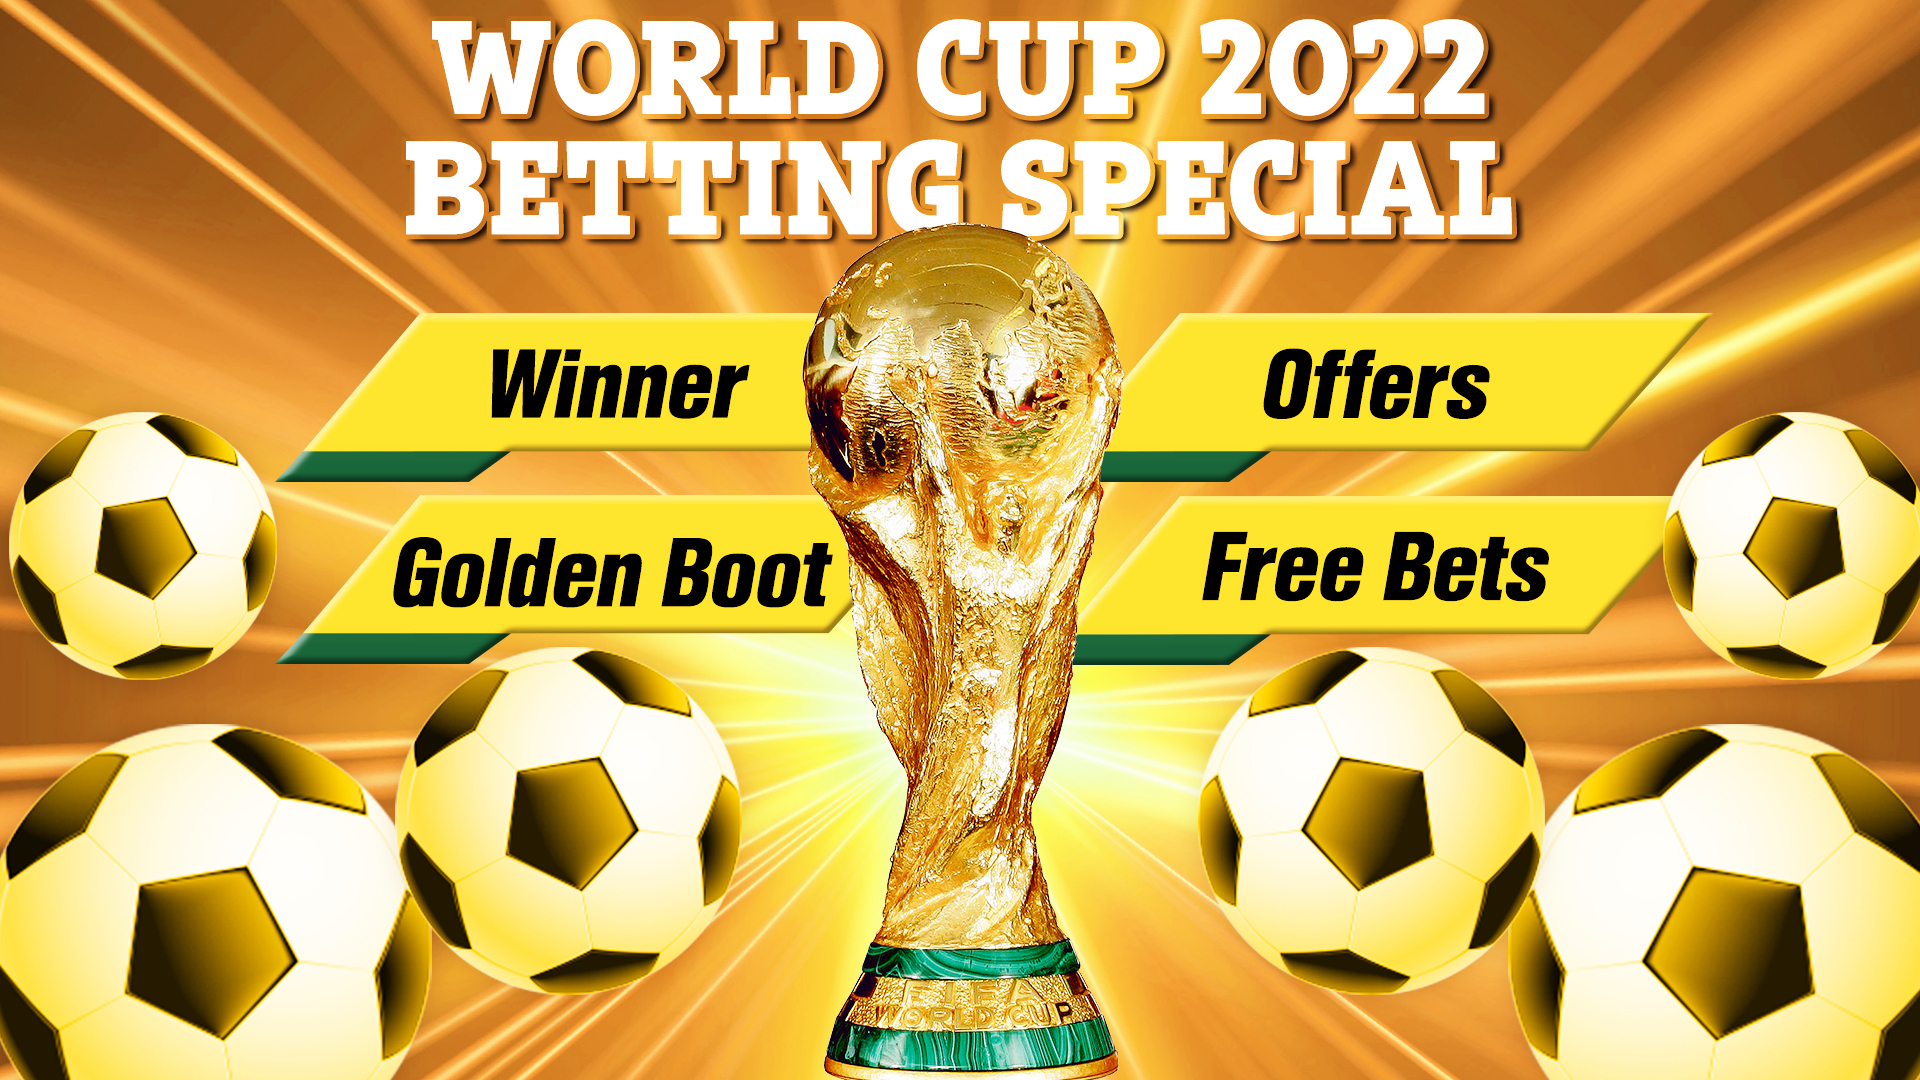 Photo: betting on world cup